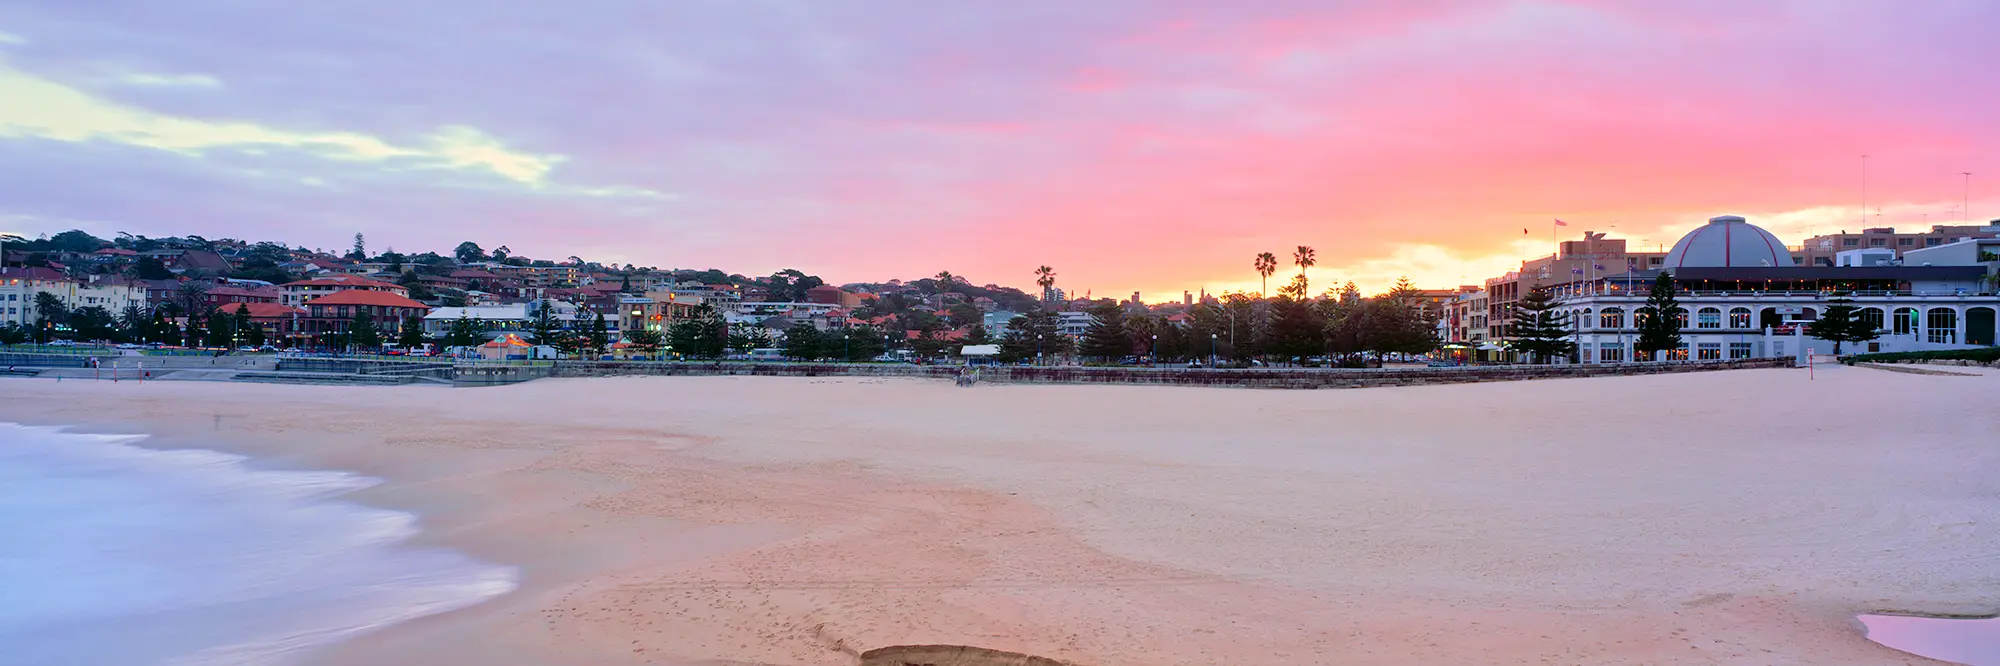 Coogee Beach Panoramic Sunset Landscape Images